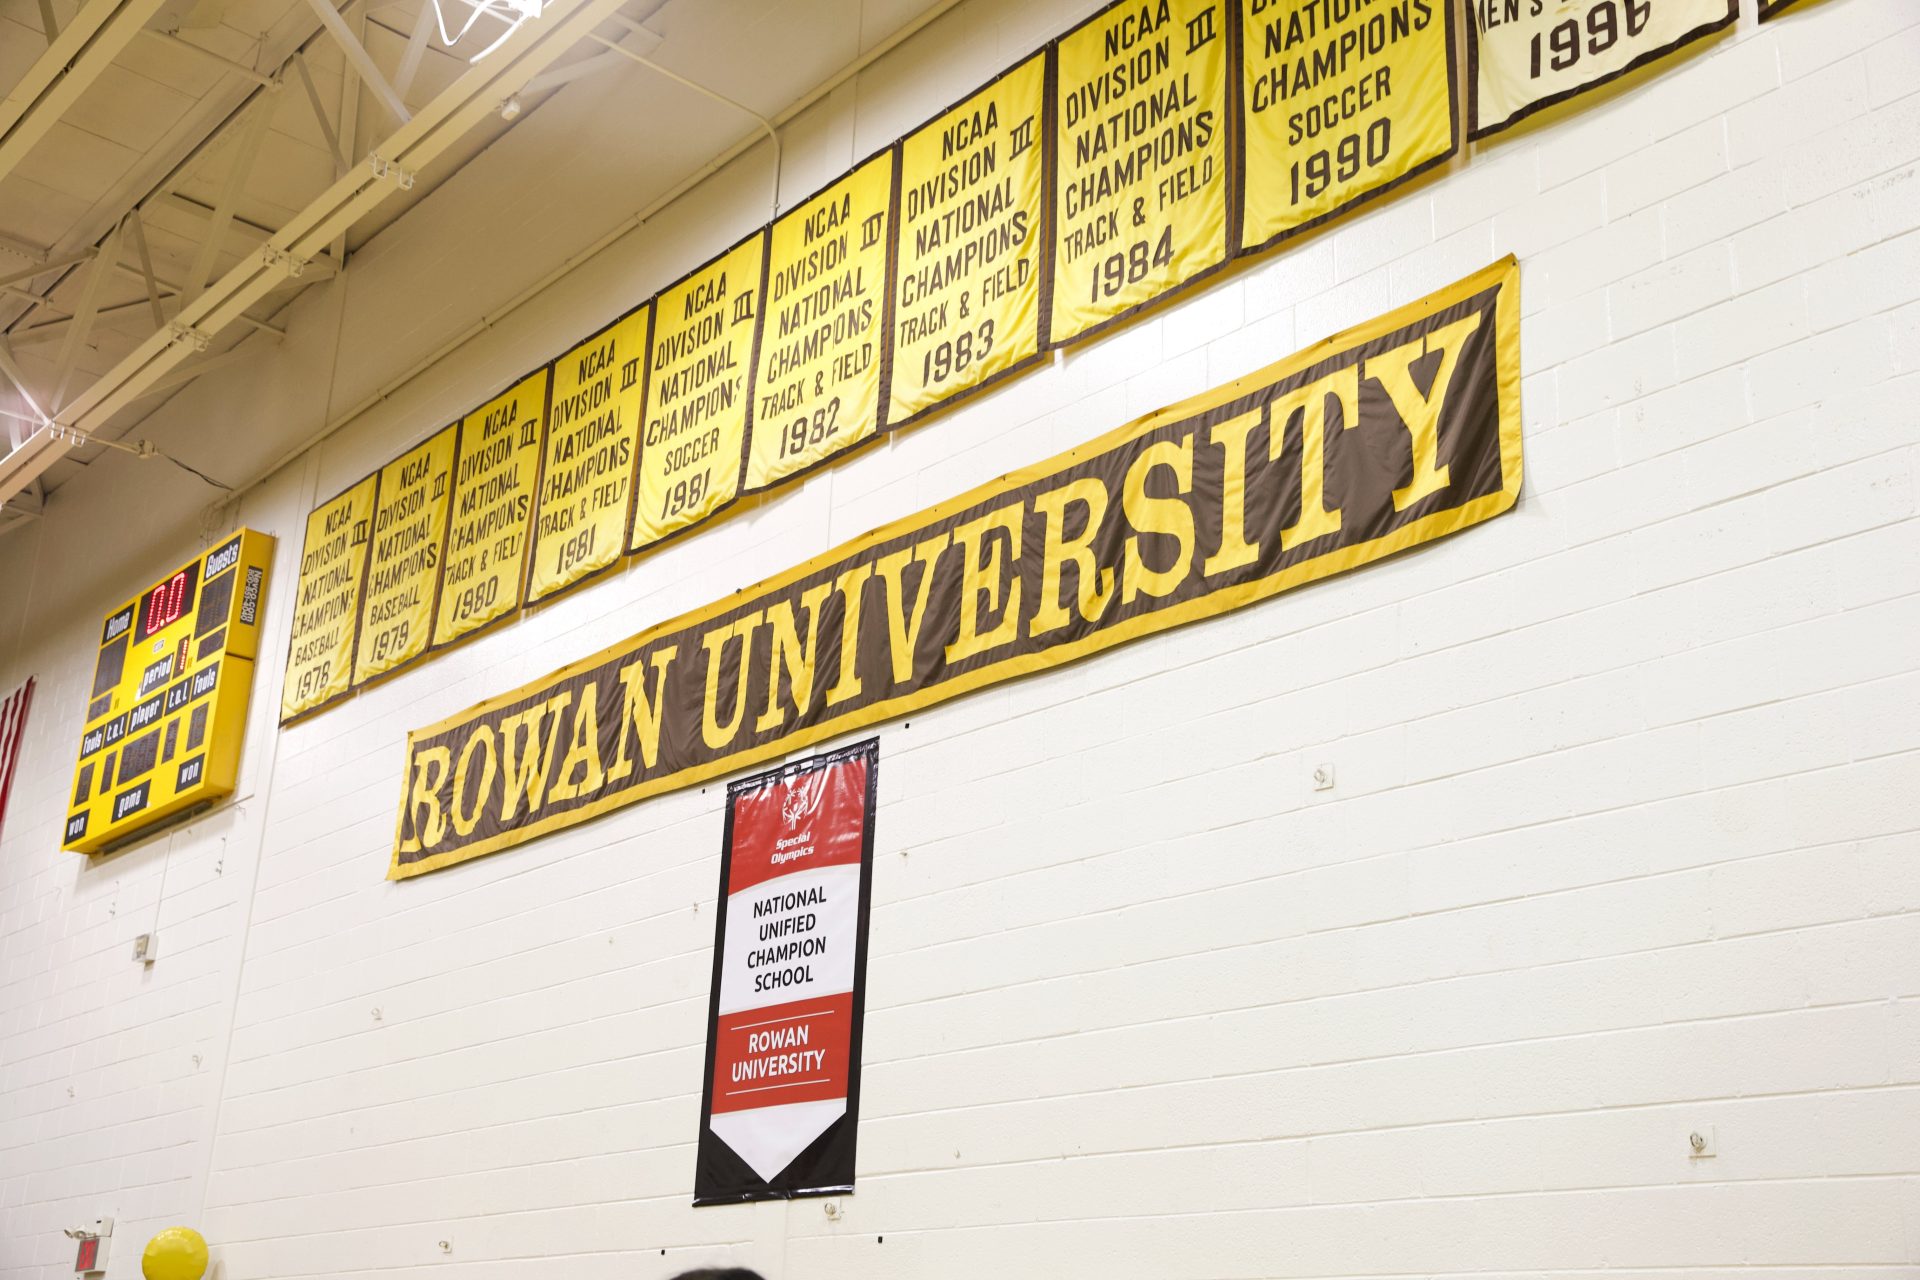 The banner recognizing Rowan University as a Special Olympics Champion School. 